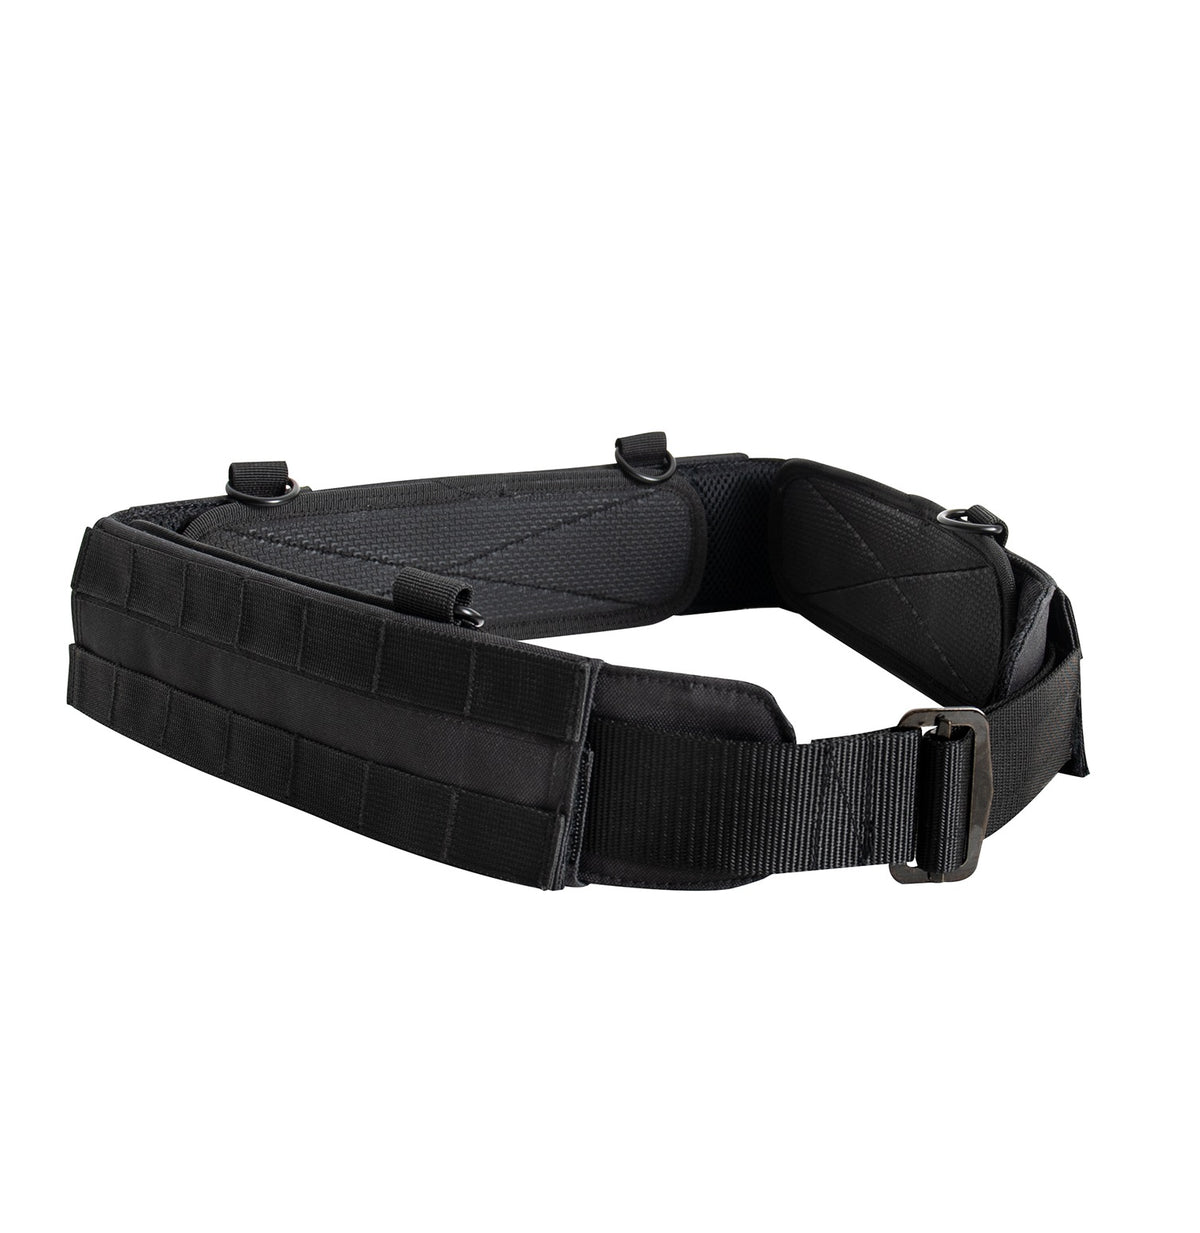 Rothco MOLLE Lightweight Low Profile Tactical Battle Belt Black